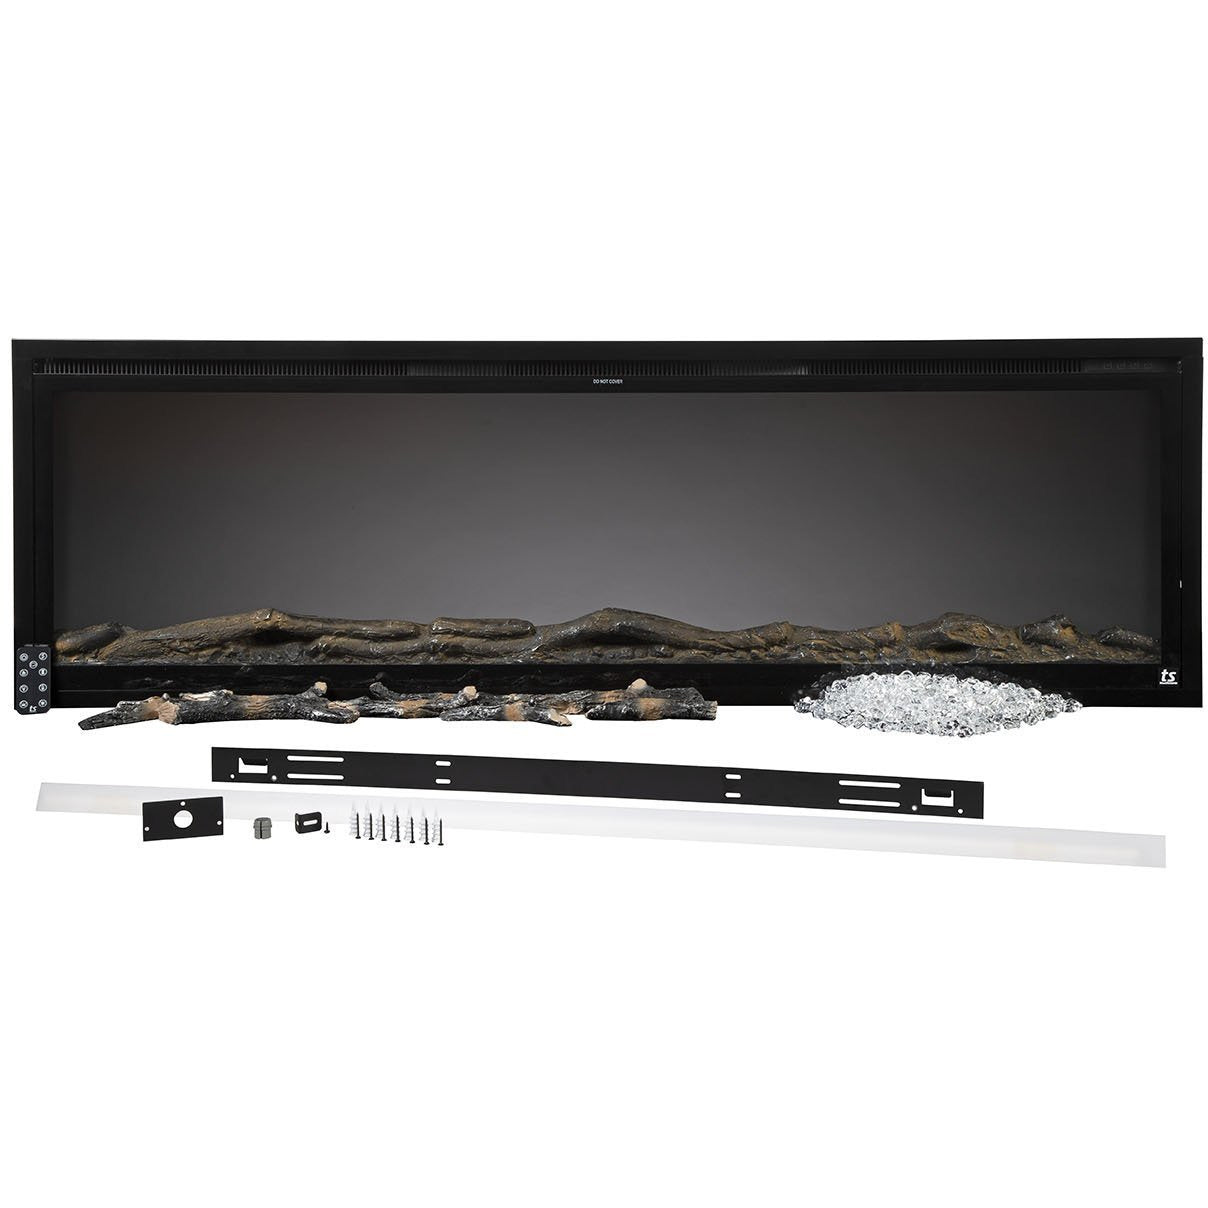 Touchstone Sideline Elite 72'' Recessed Electric Fireplace faux drift wood fire logs and glass crystal.